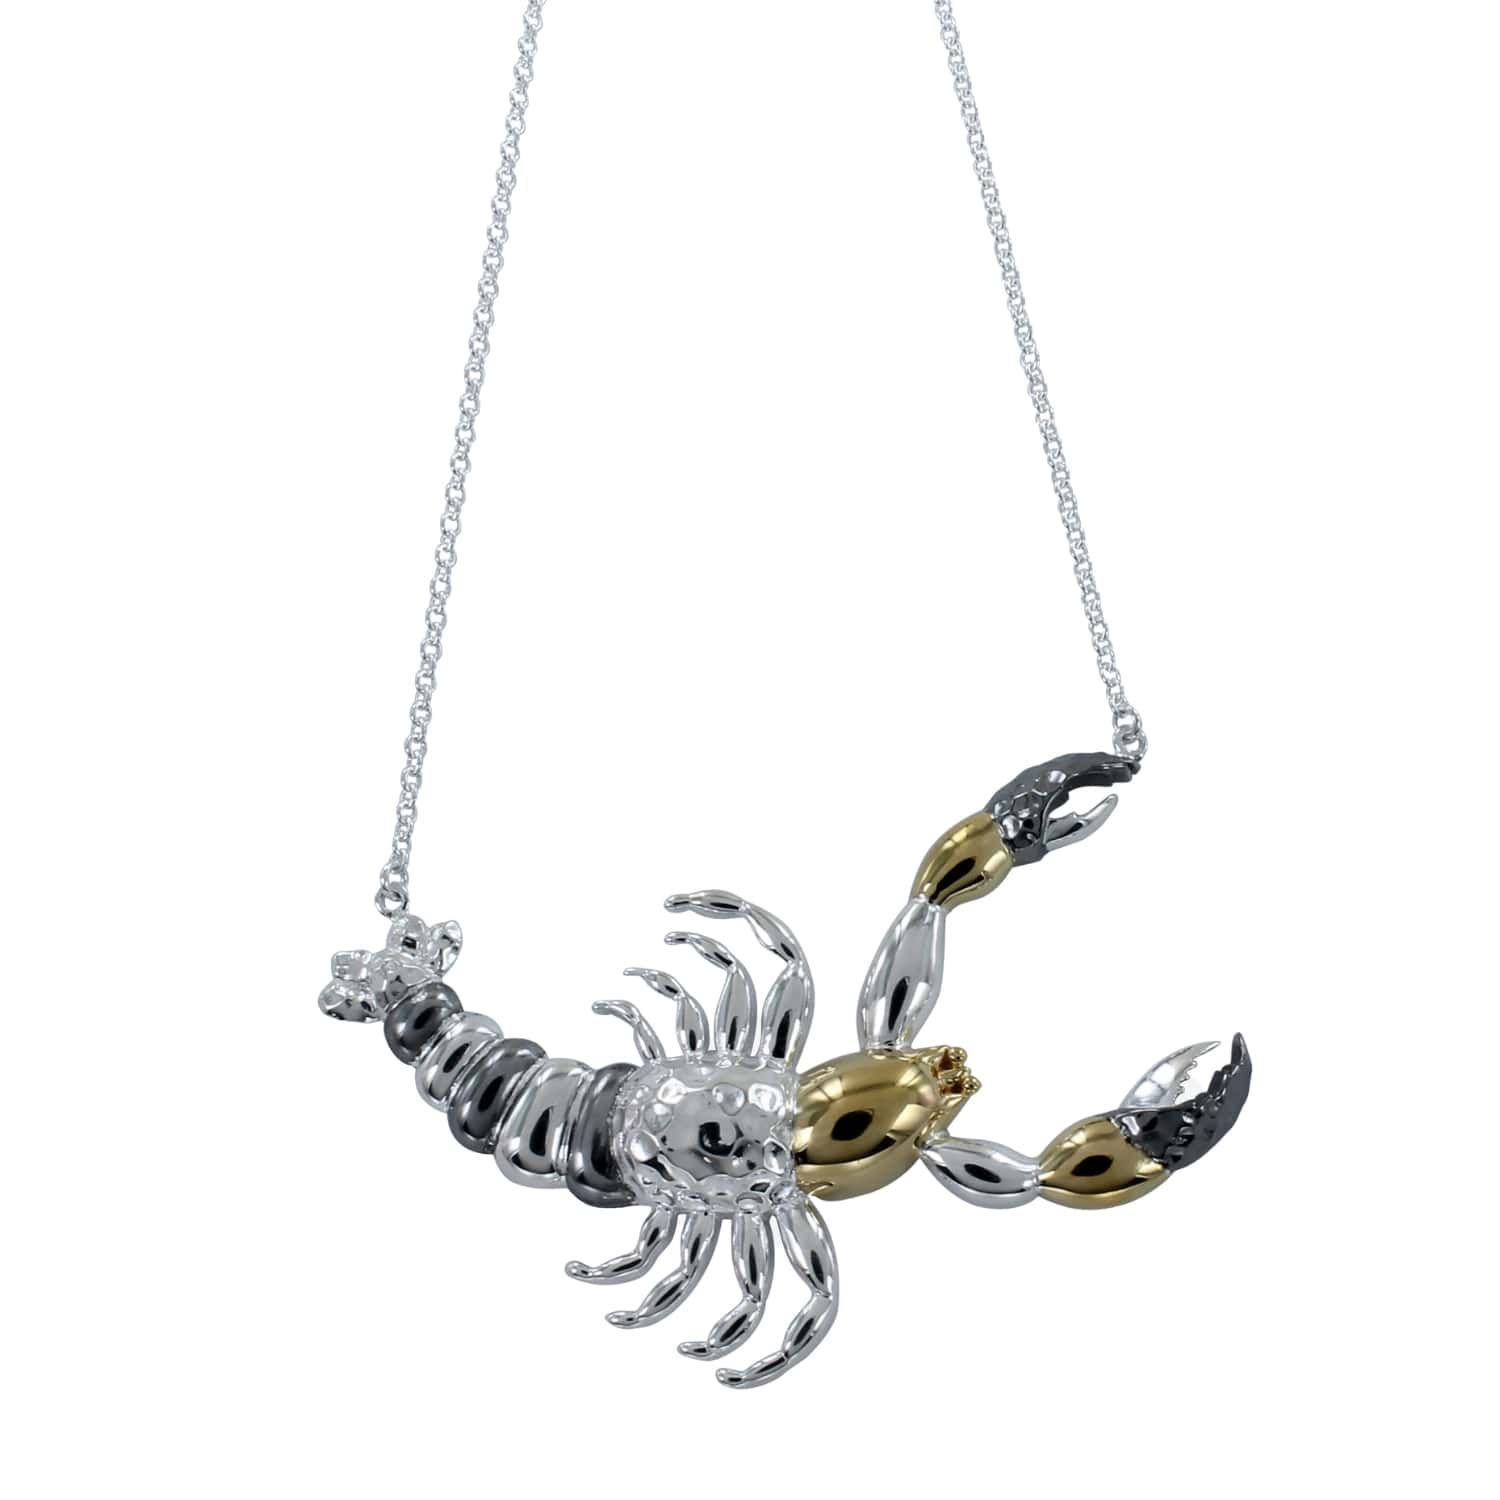 Reeves & Reeves Women's Silver / Gold Supersize Lobster Statement Necklace In Gray